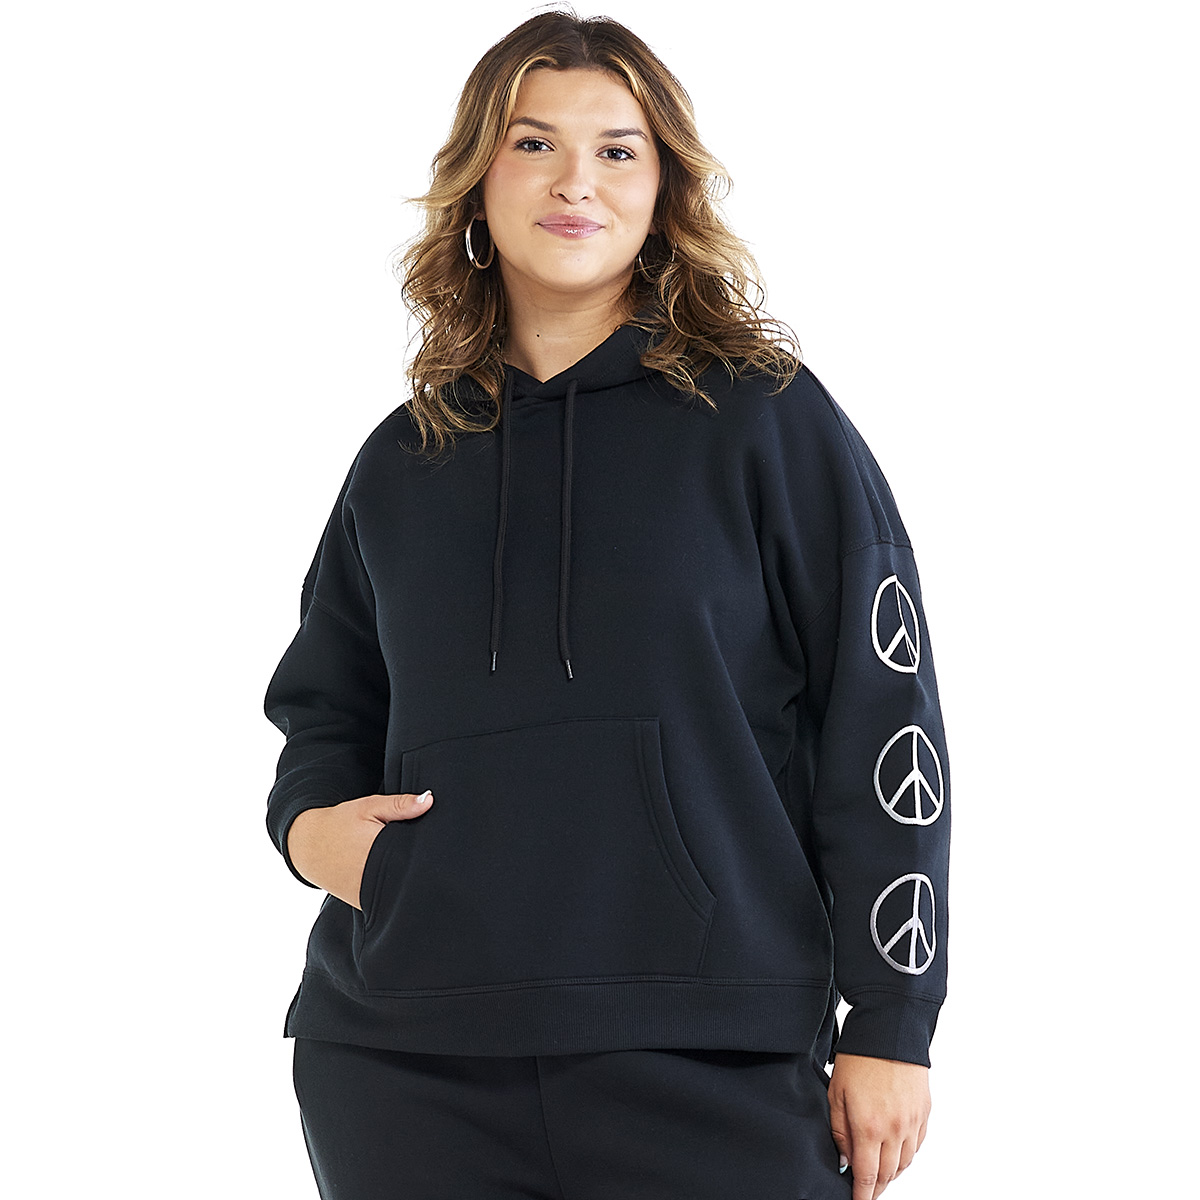 Juniors Plus No Comment Embroidered Sleeve Fleece Hoodie-Black